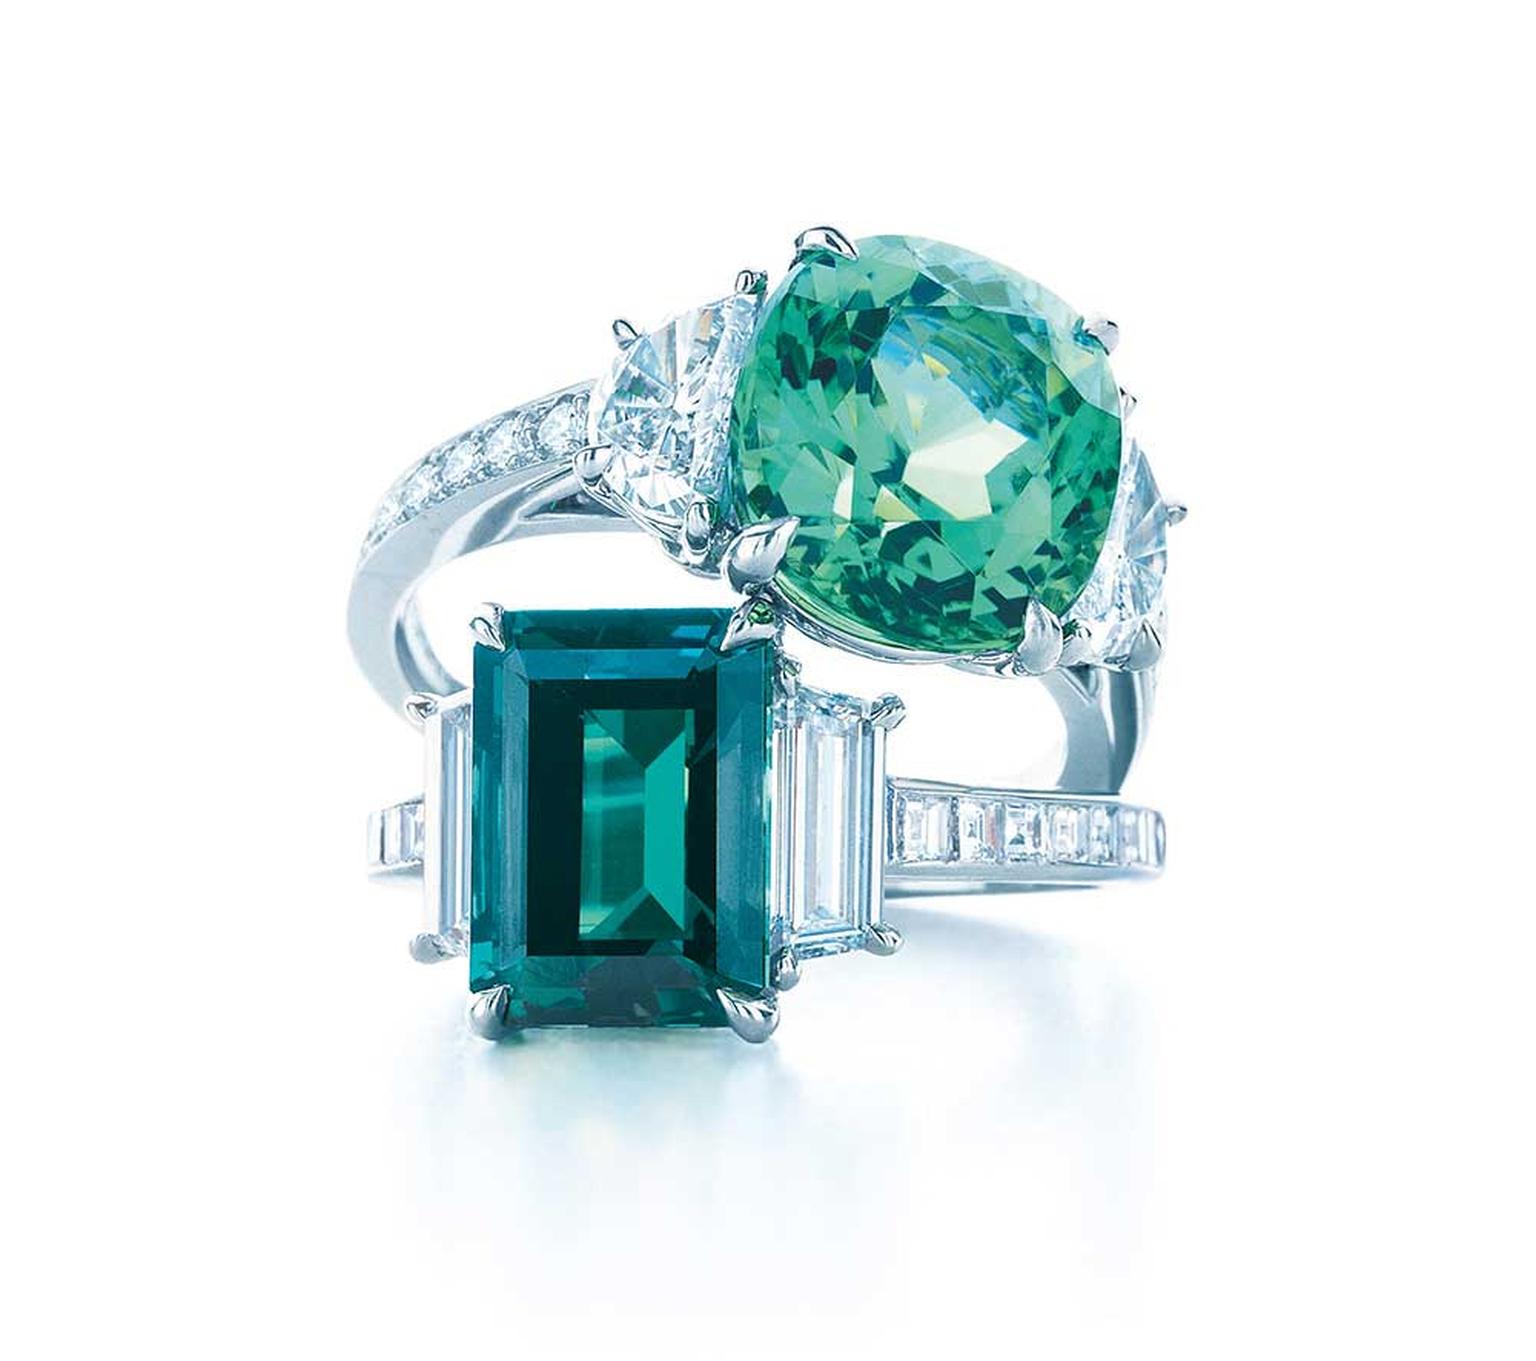 7 rare colored gemstone engagement rings every alternative bride will love